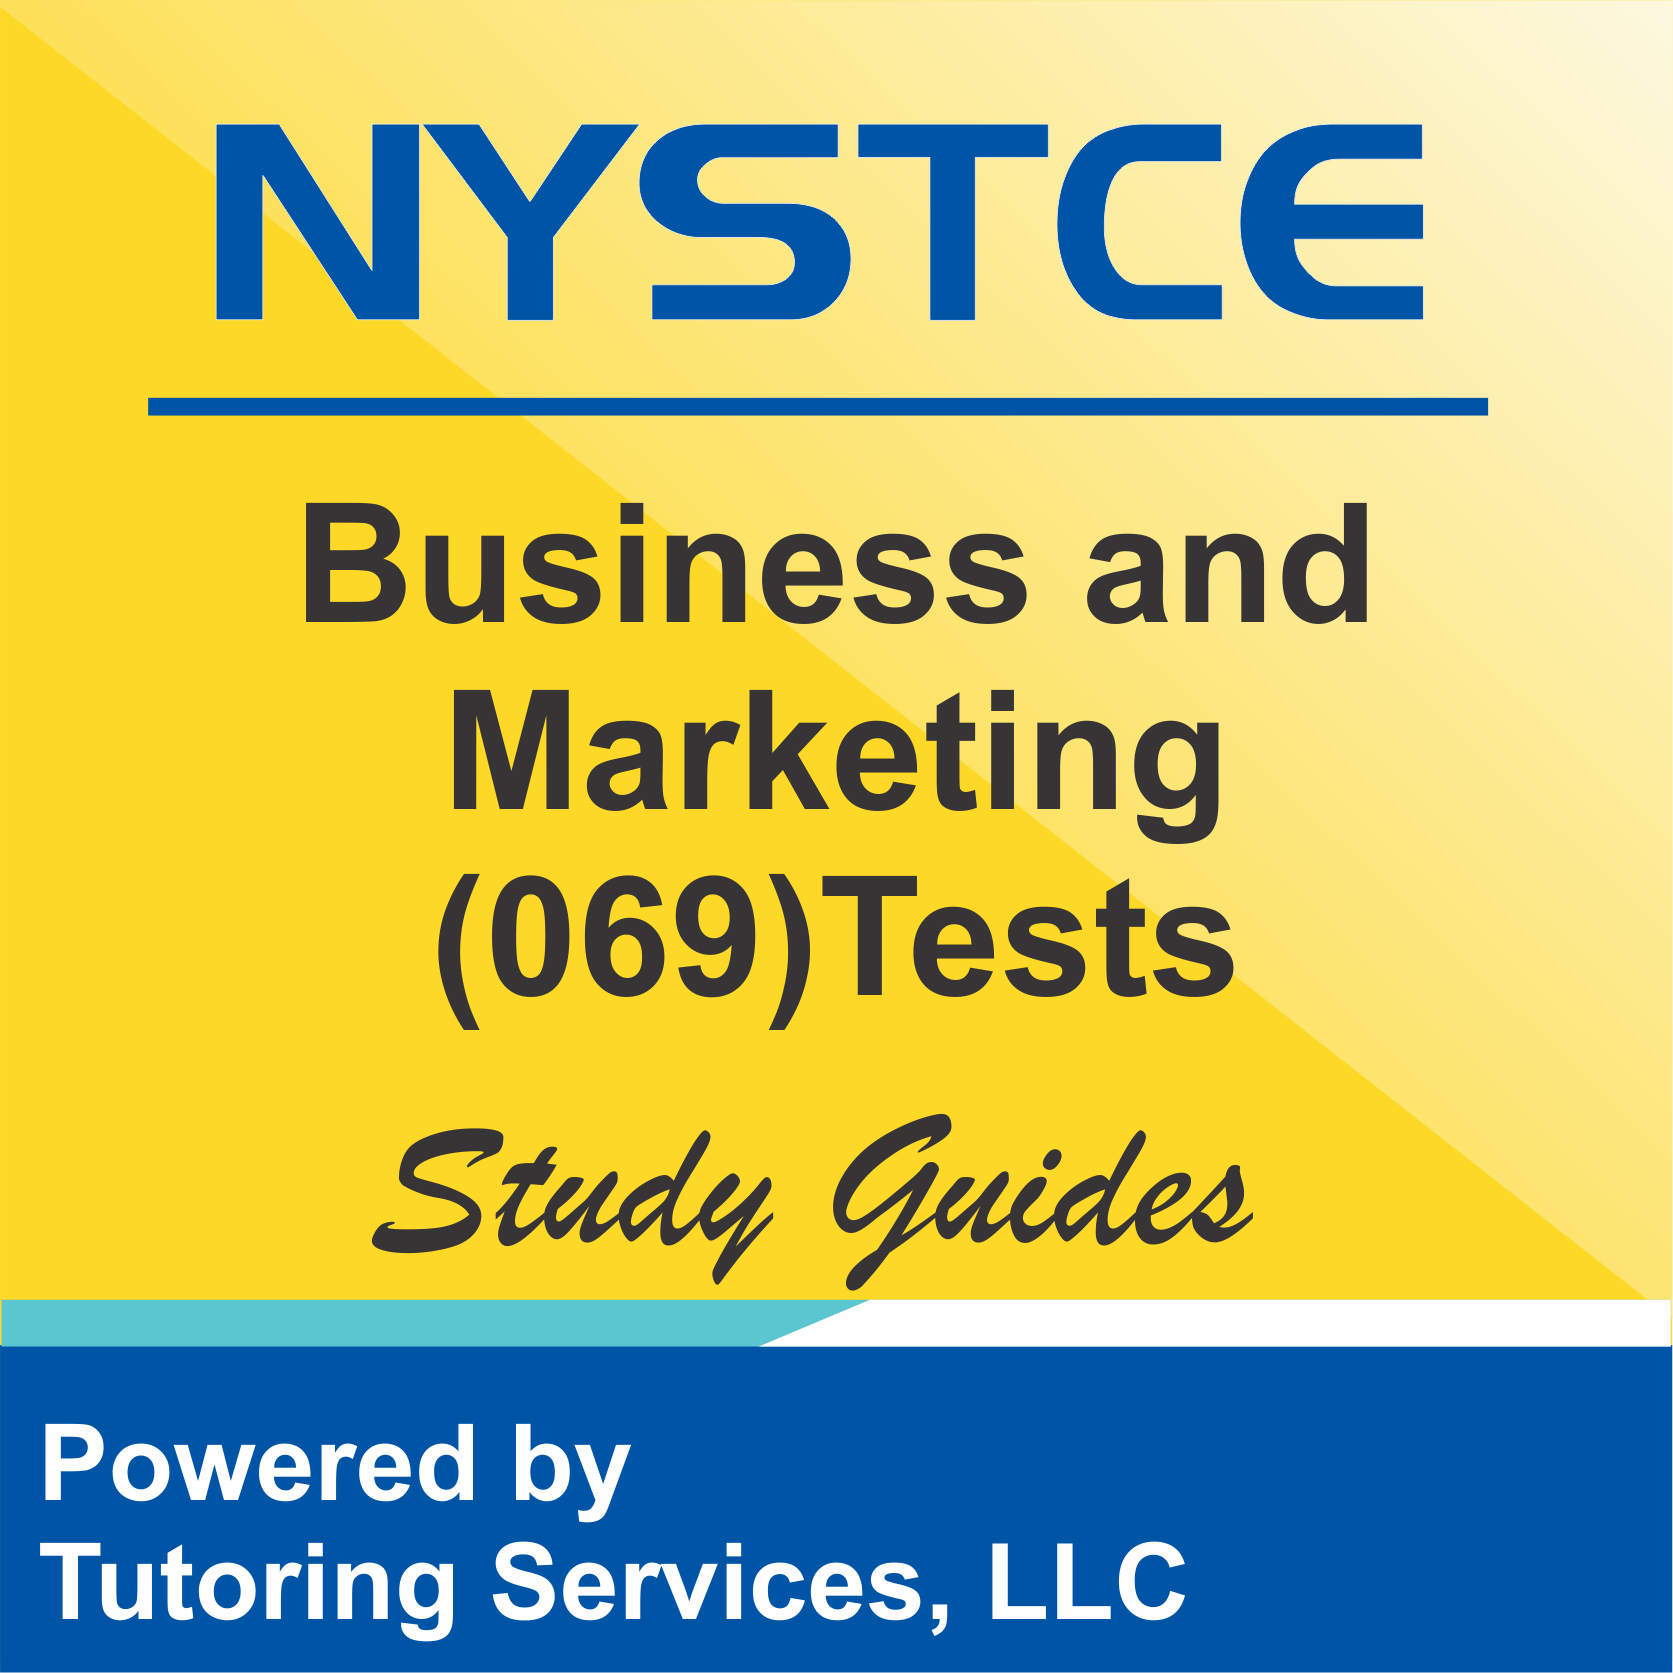 NYSTCE Licensure Test and Exam Details for Business and Marketing 069